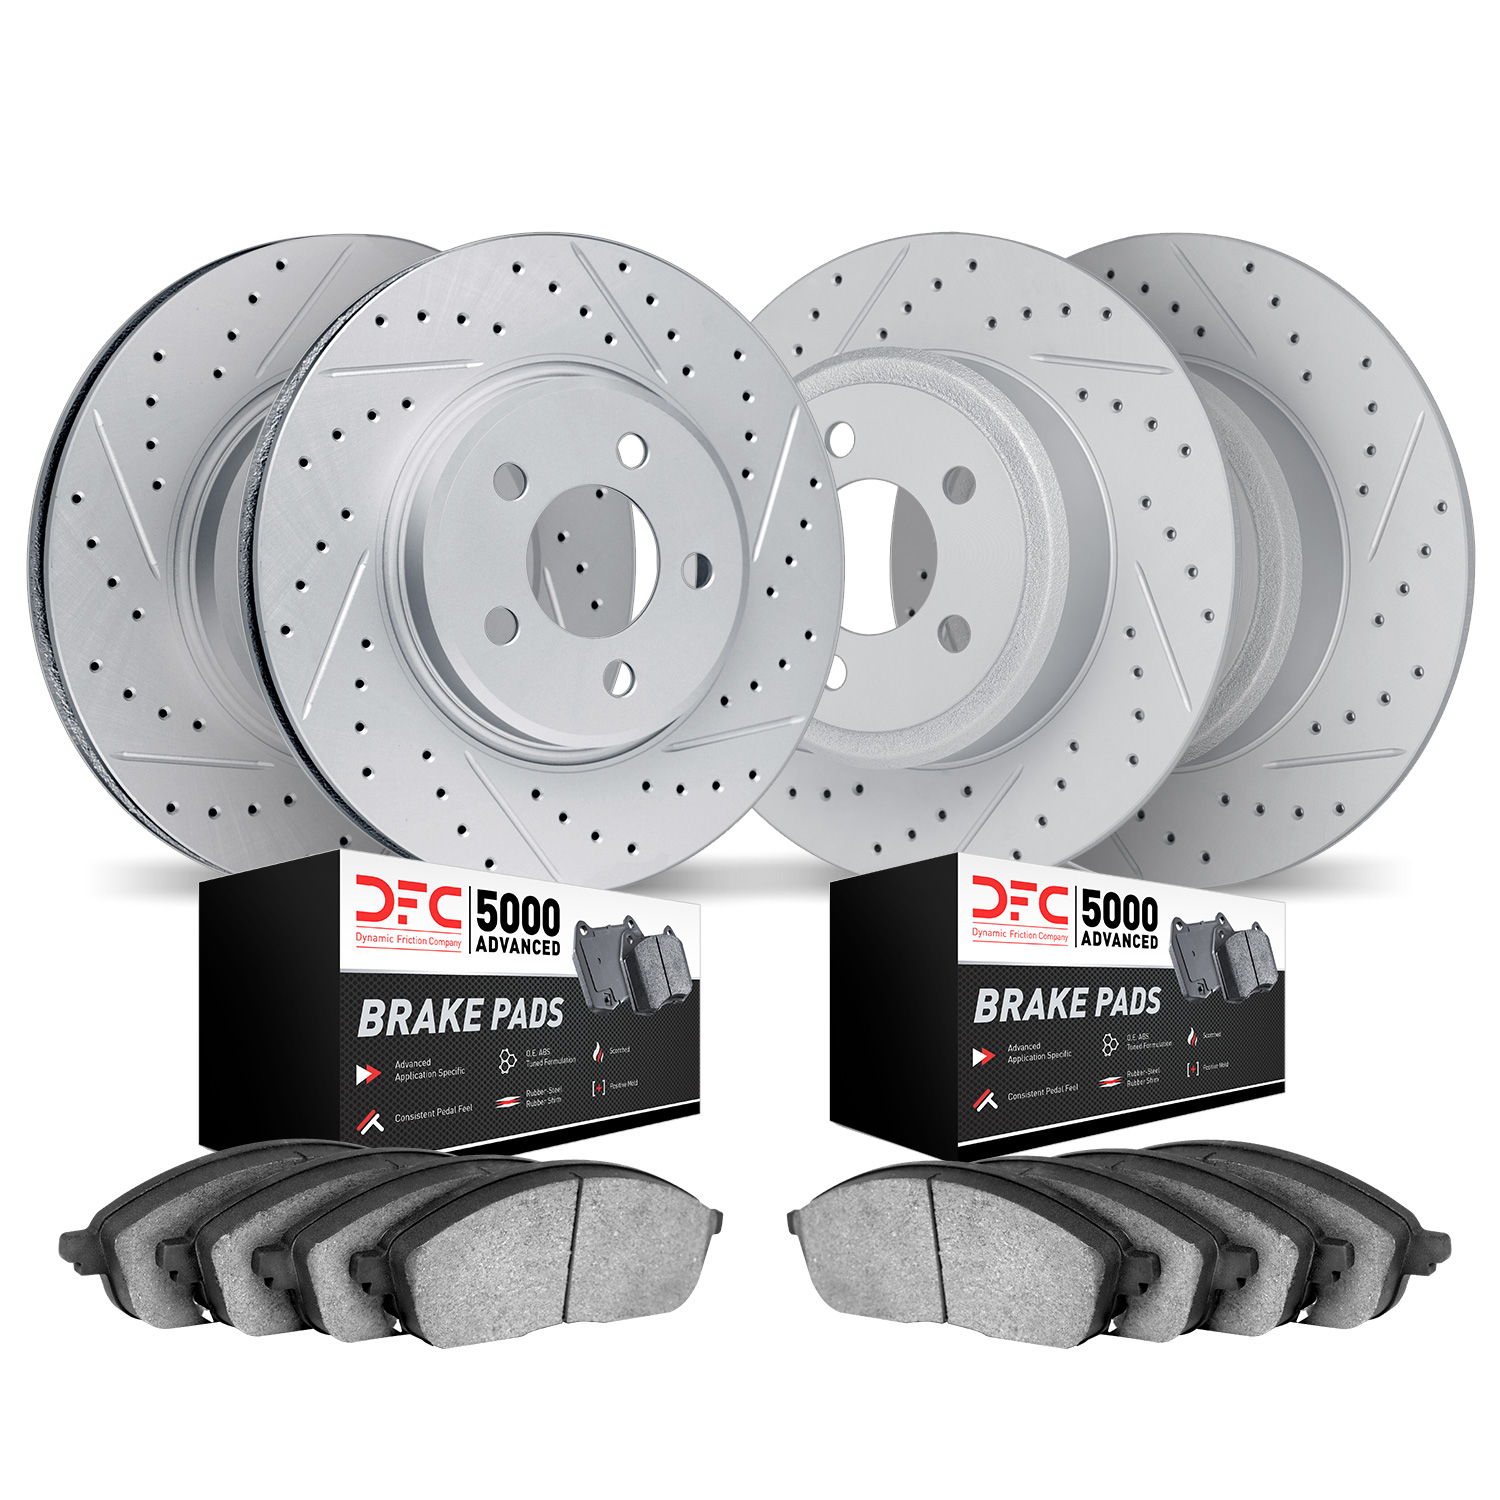 2504-45010 Geoperformance Drilled/Slotted Rotors w/5000 Advanced Brake Pads Kit, 1997-1998 GM, Position: Front and Rear